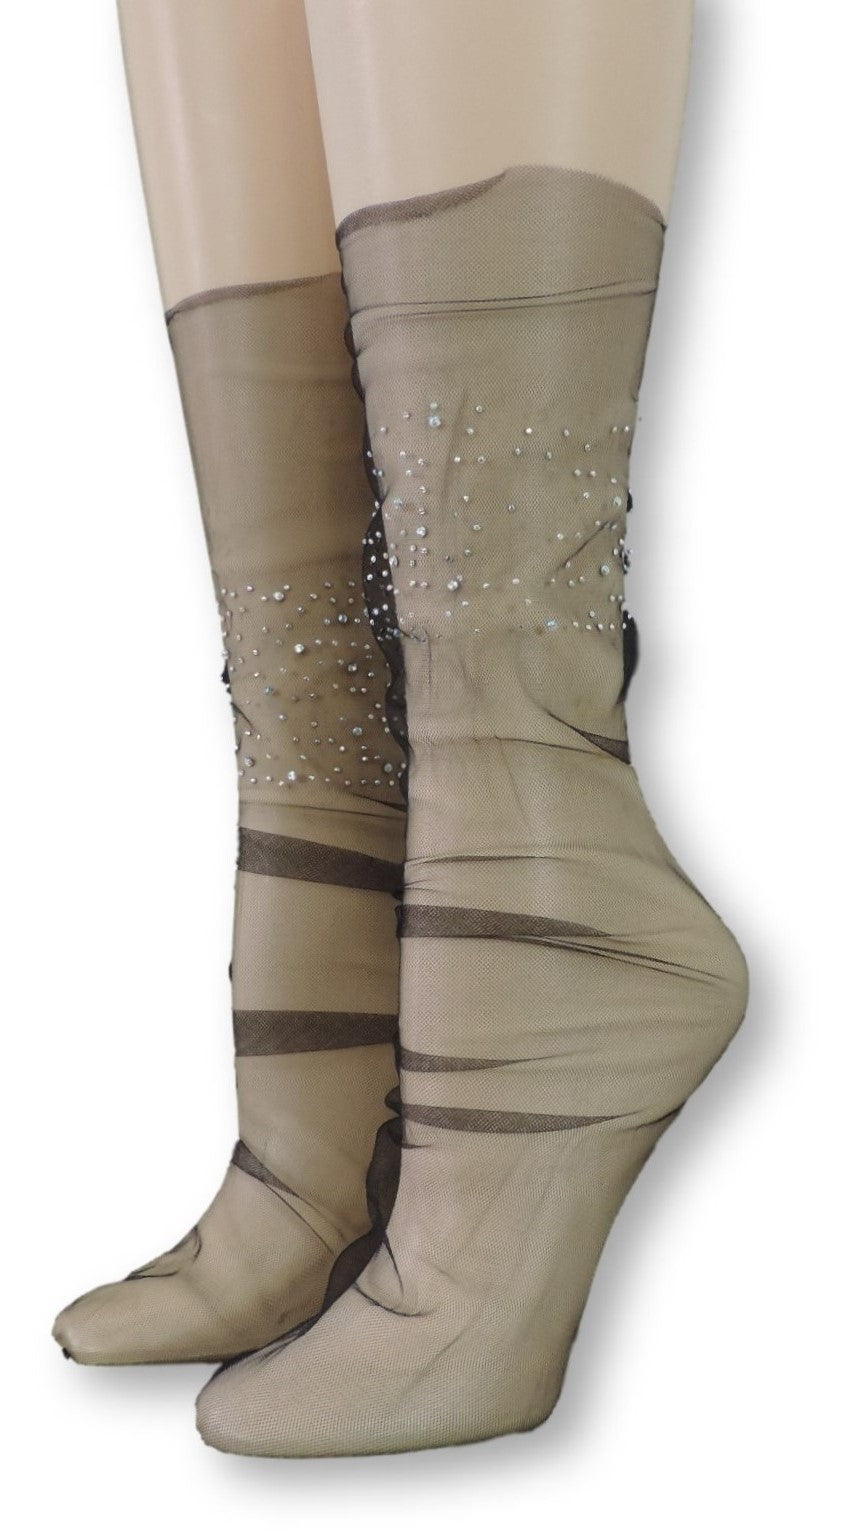 Bold Tulle Socks with Crystals - Global Trendz Fashion®